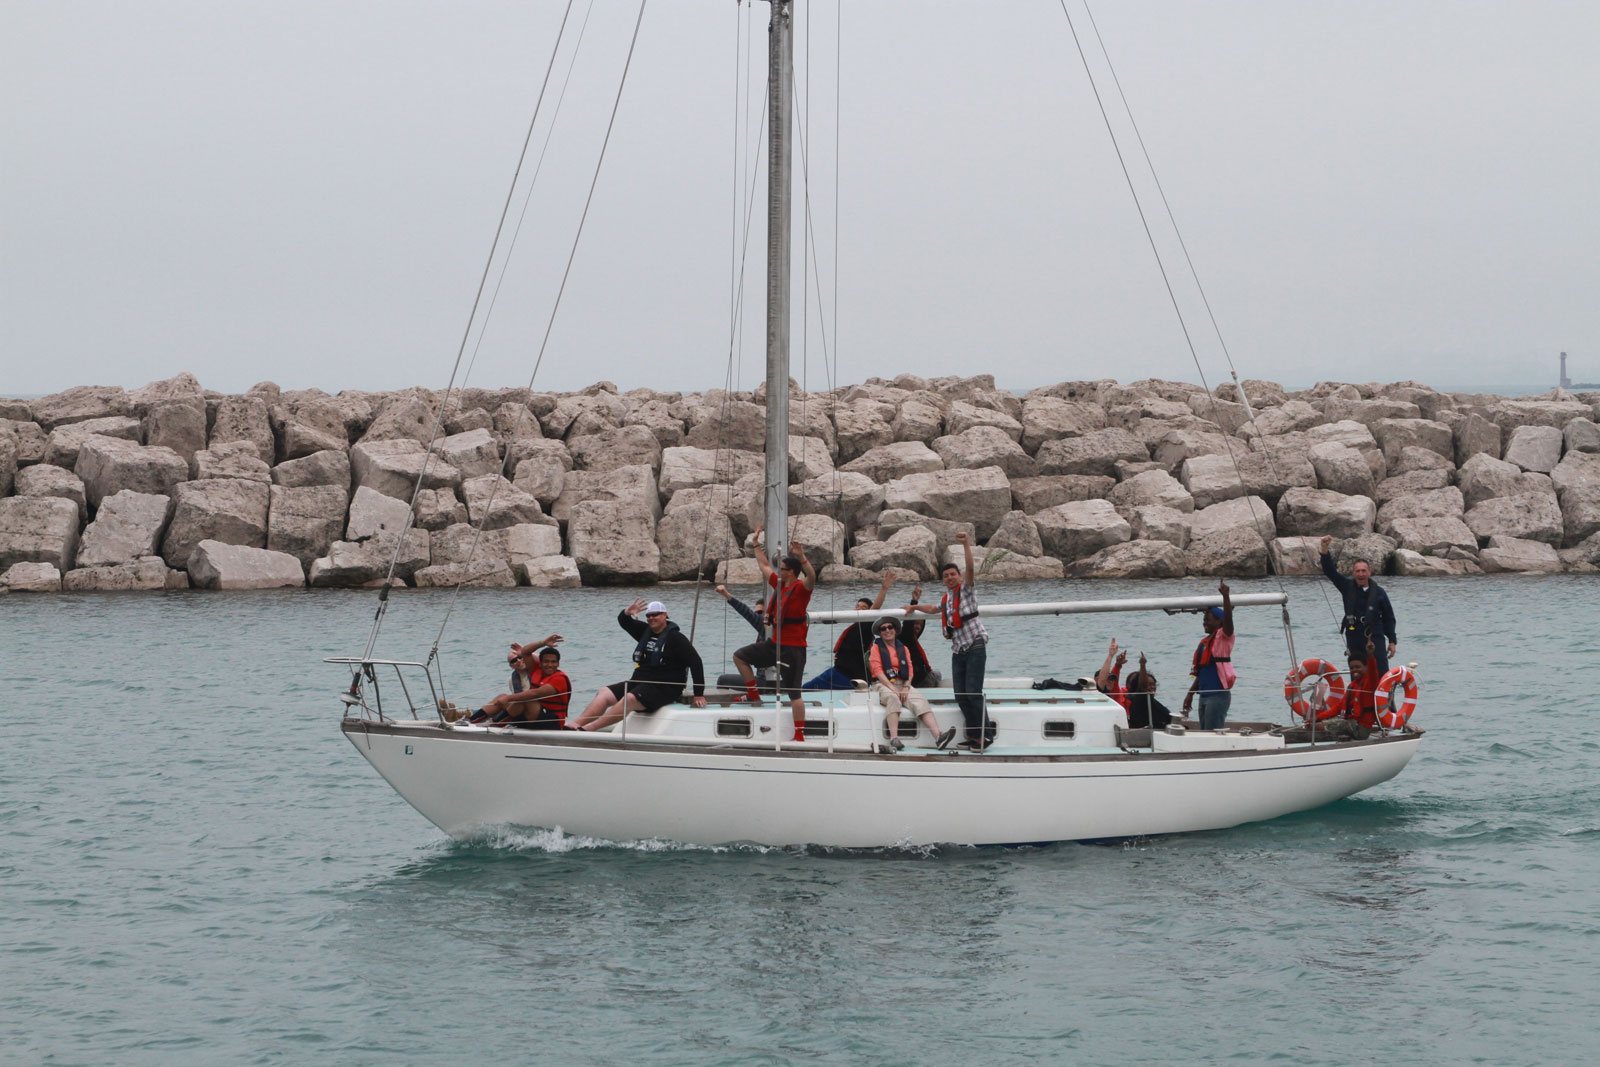 East Chicago Students Begin Another Year Sailing